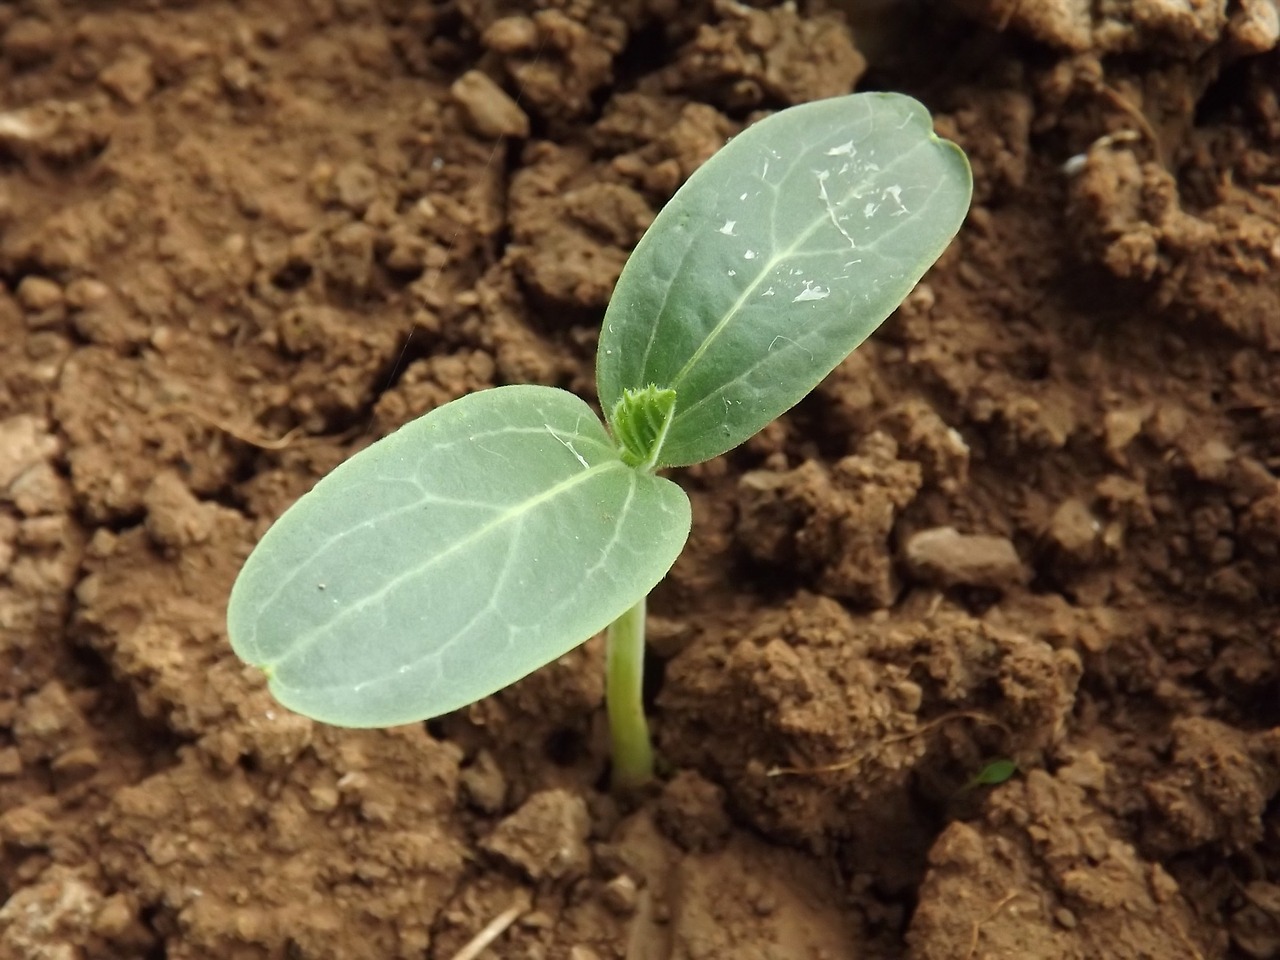 Photo of a small baby plant poking out of the soil